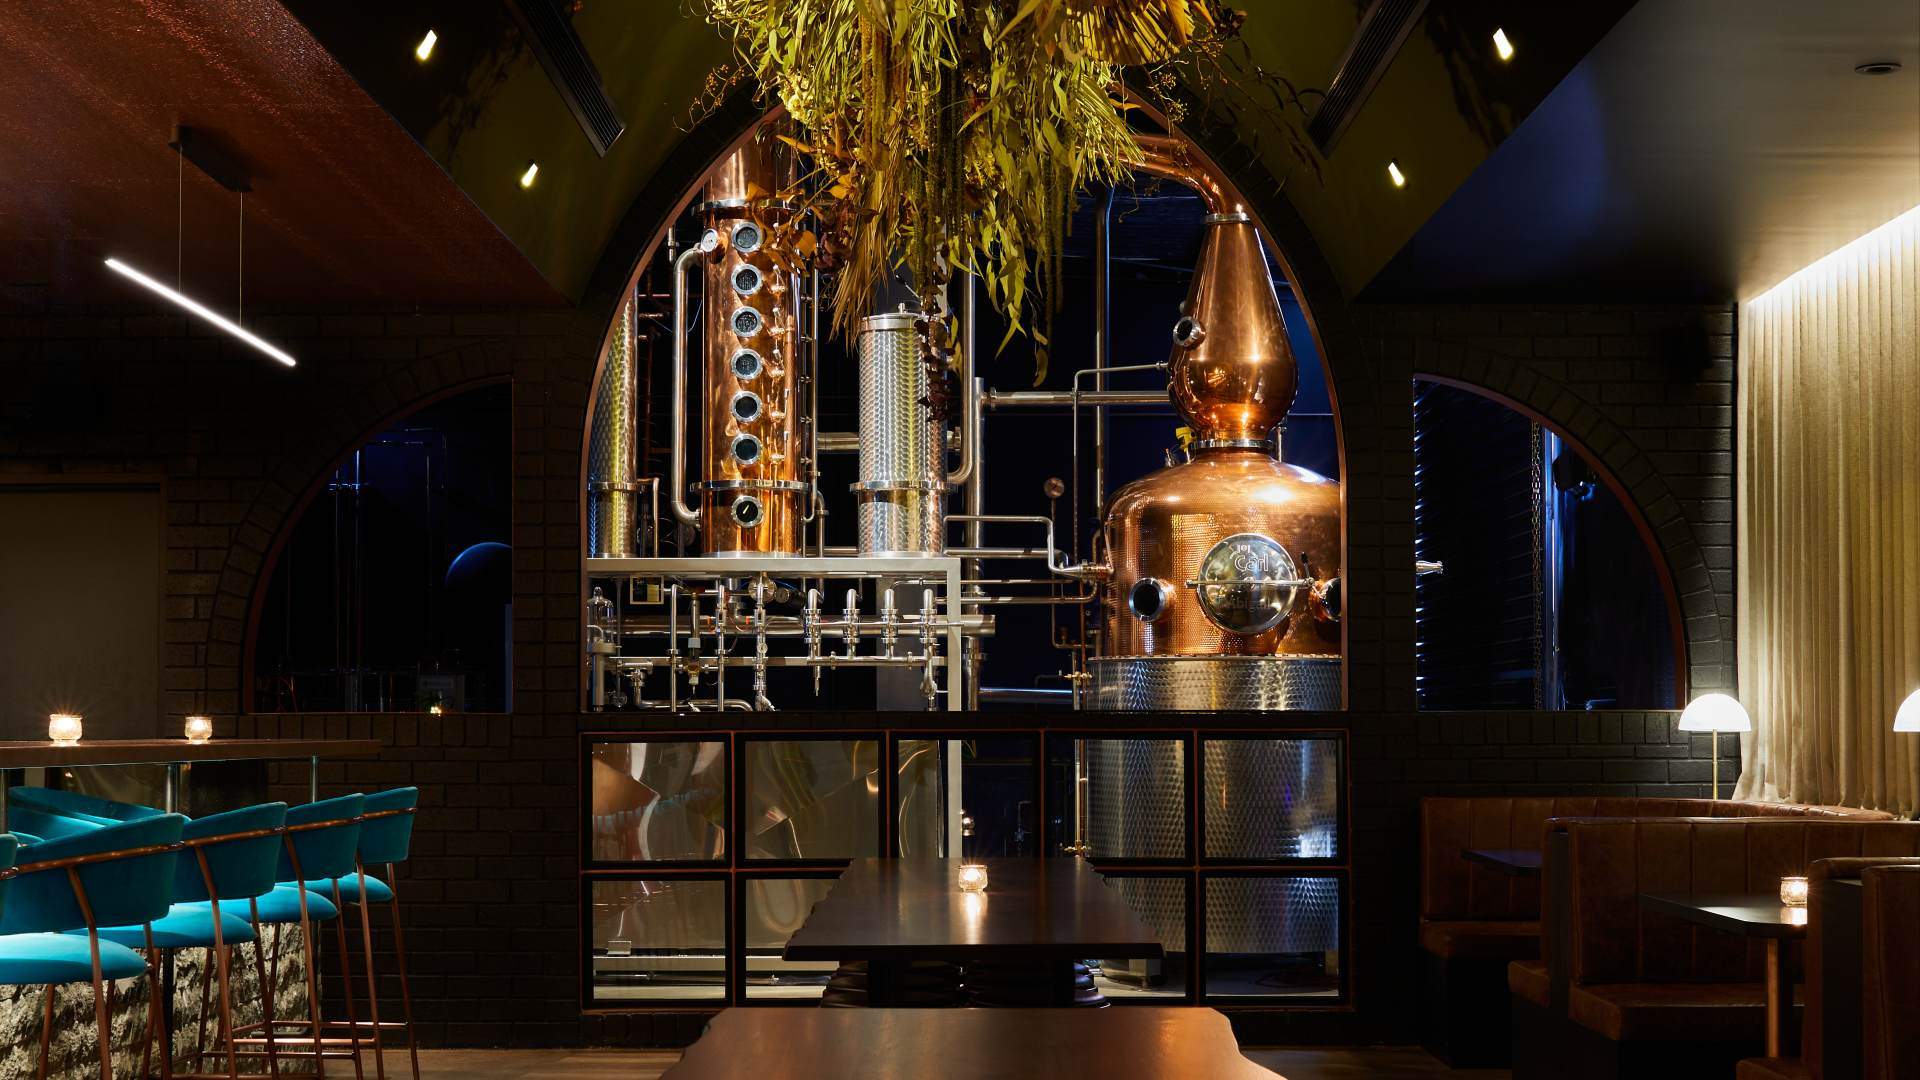 Award-Winning Gin Distillery Naught Has Opened a Sultry New Cocktail Destination in Eltham